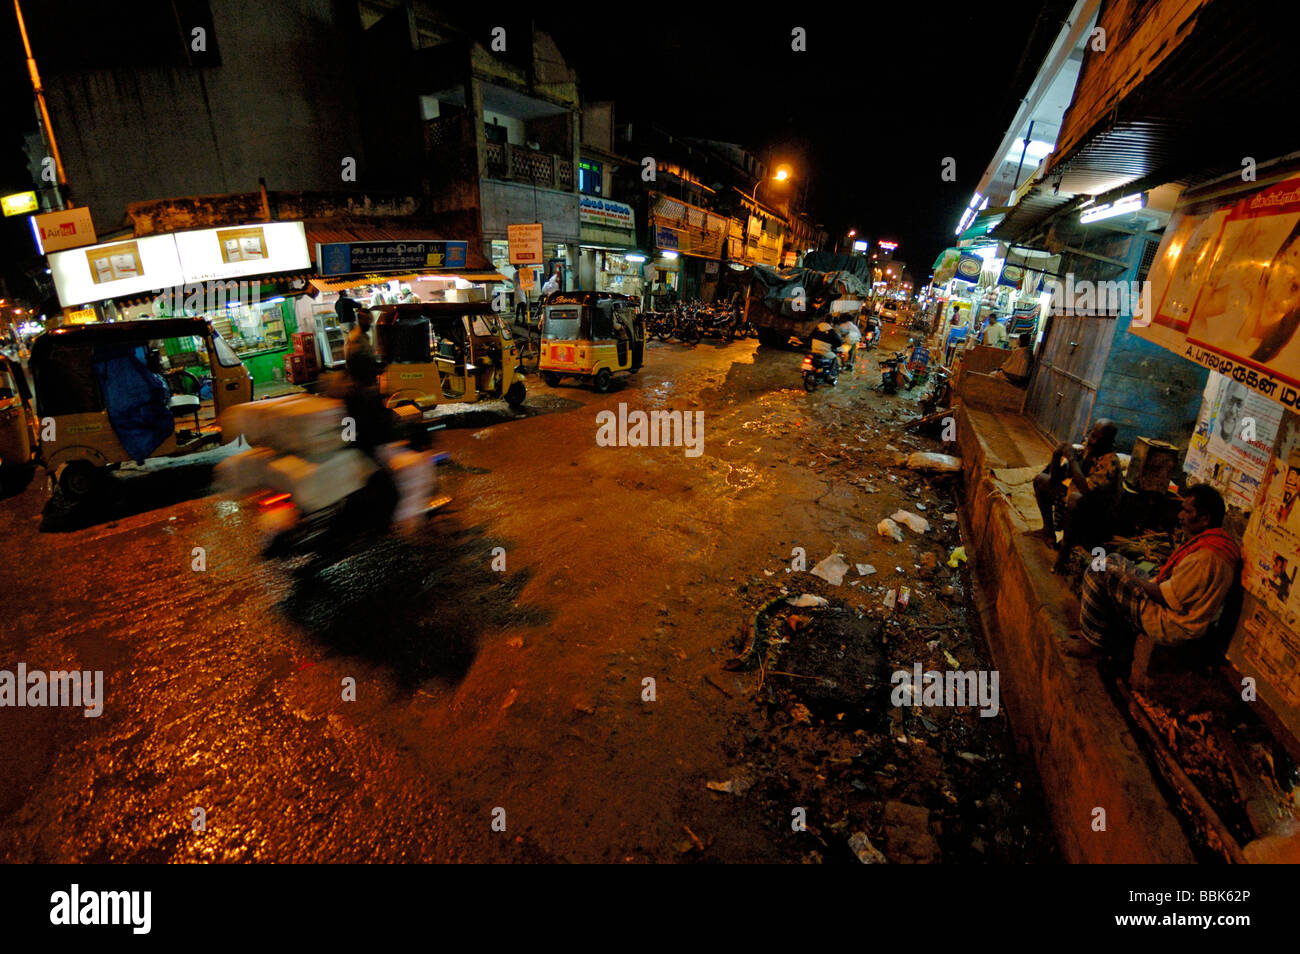 Busy nighttime in the town of Pondicherry. India, Tamil Nadu, Pondicherry.  No releases available. Stock Photo